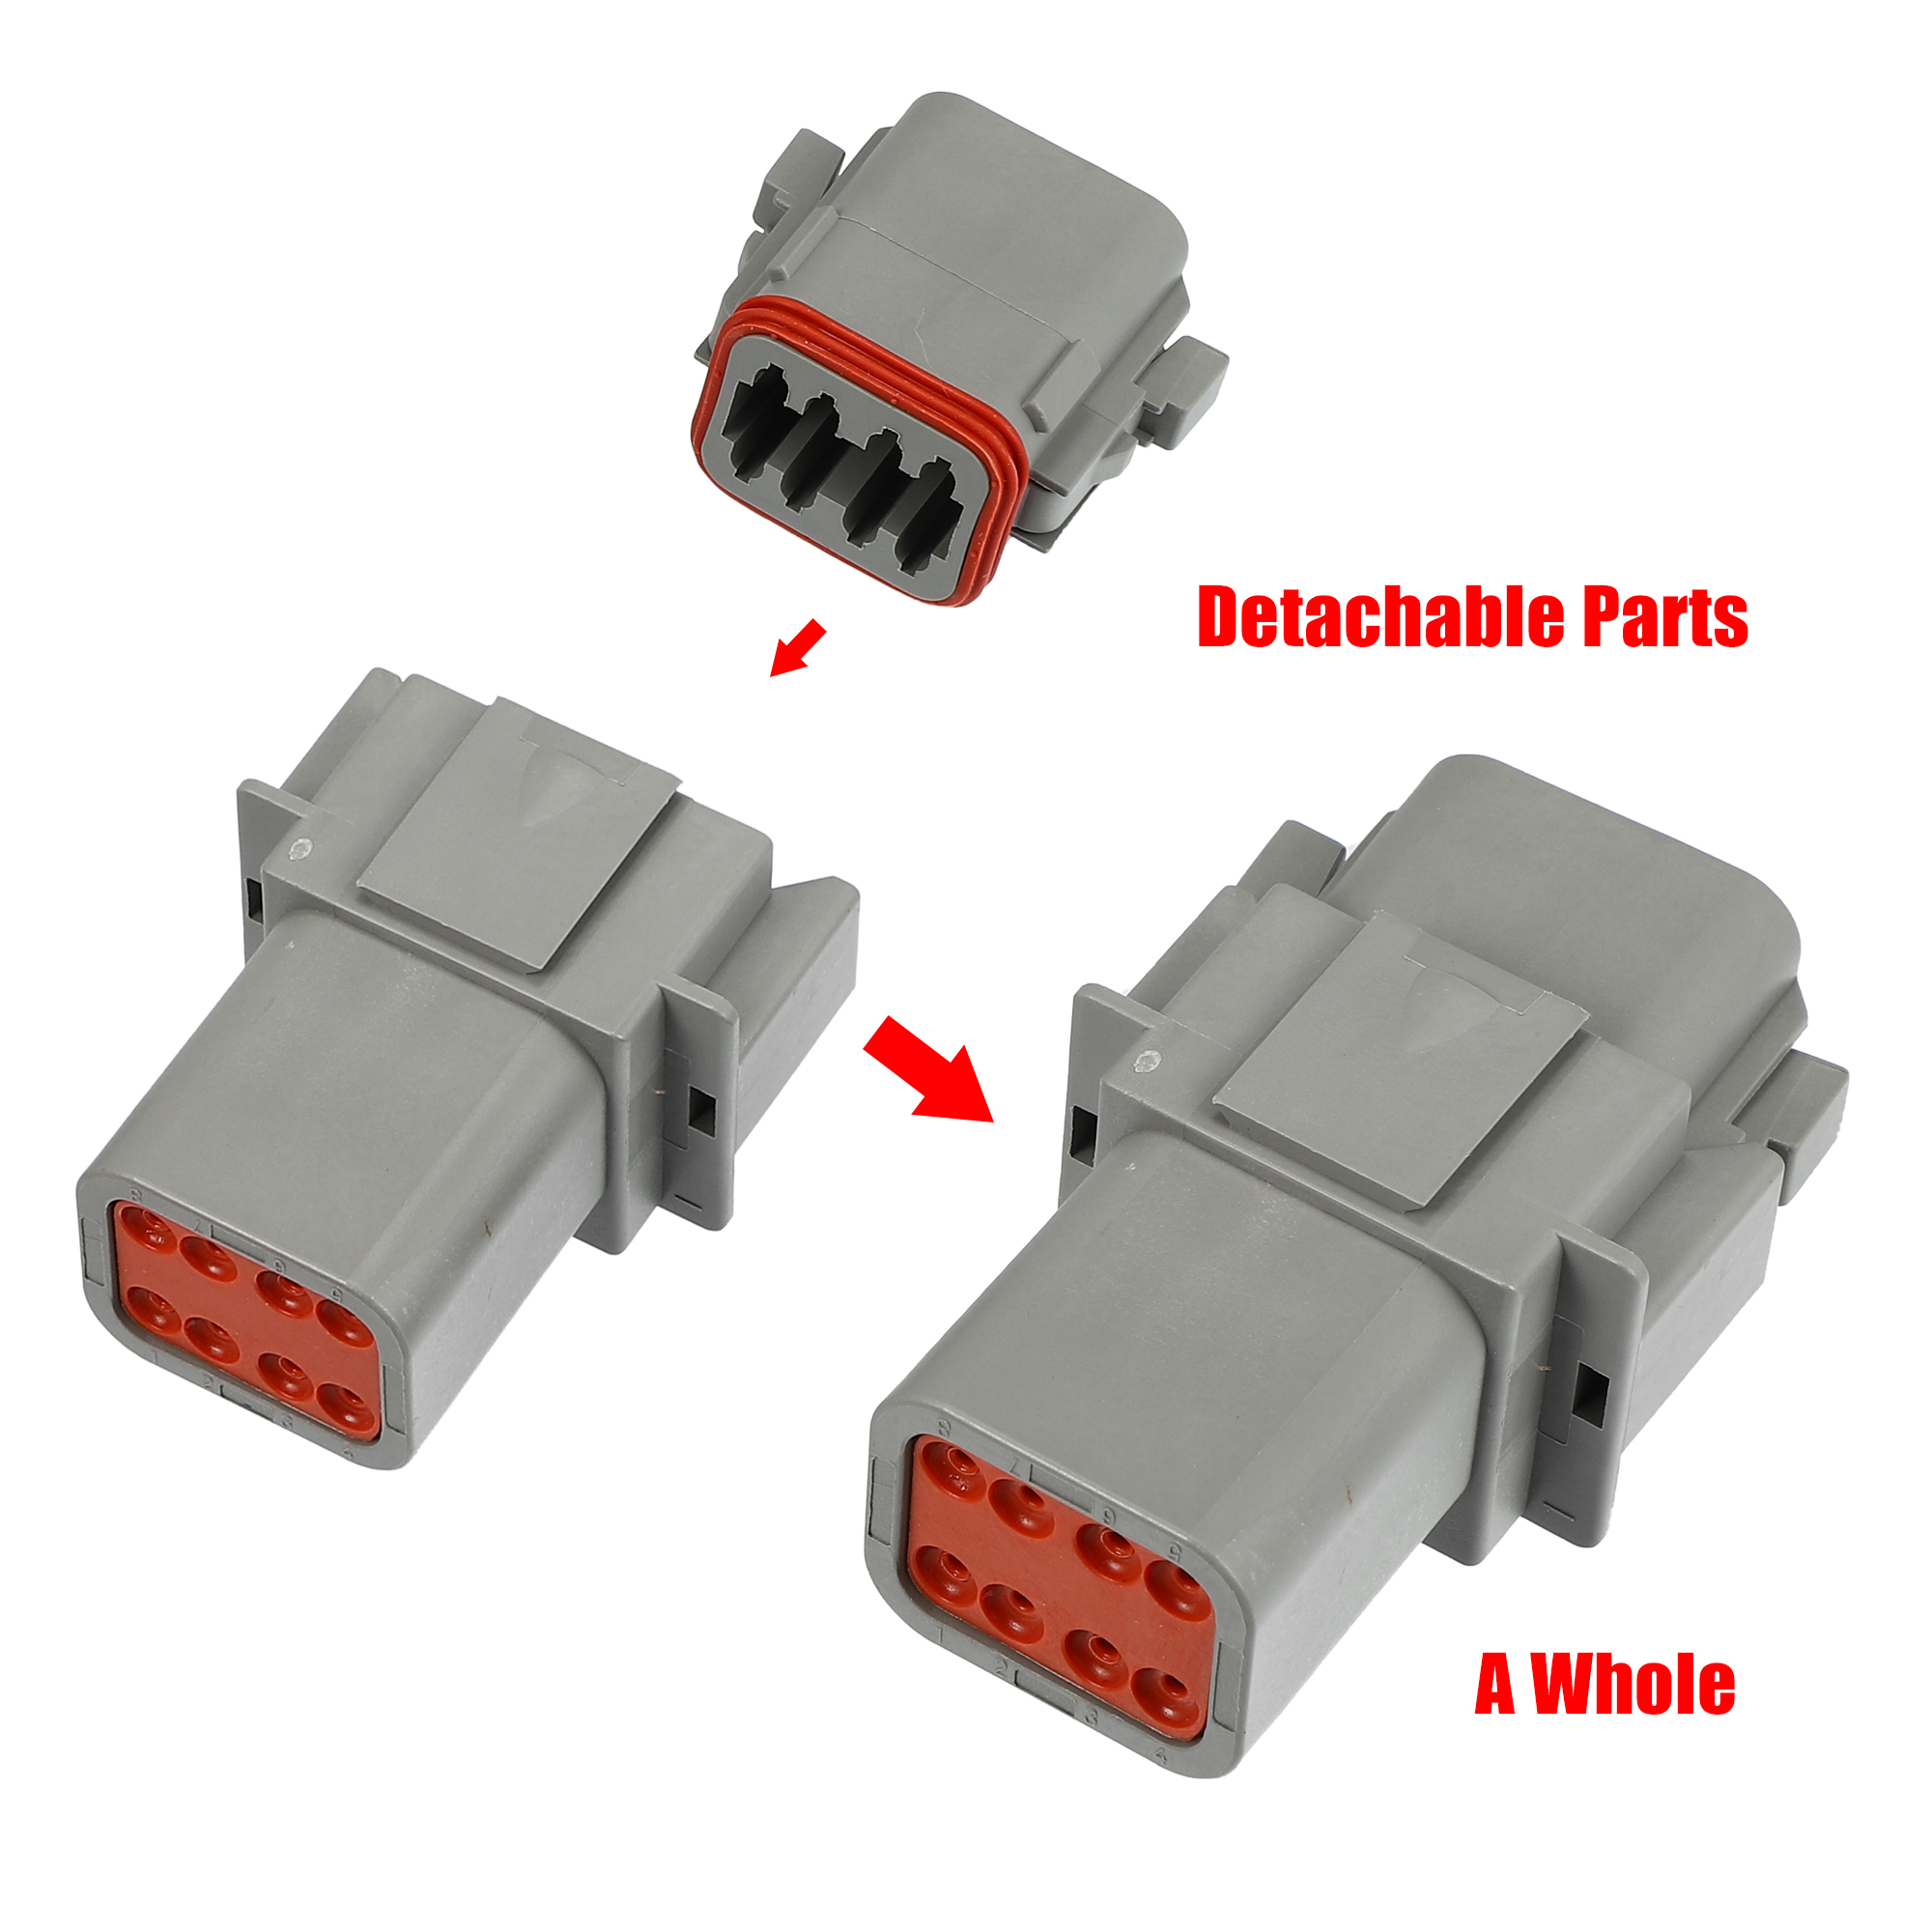 Unique Bargains 3 Set 8 Pin Way Connector Gray Waterproof Electrical Wire Connector for Car